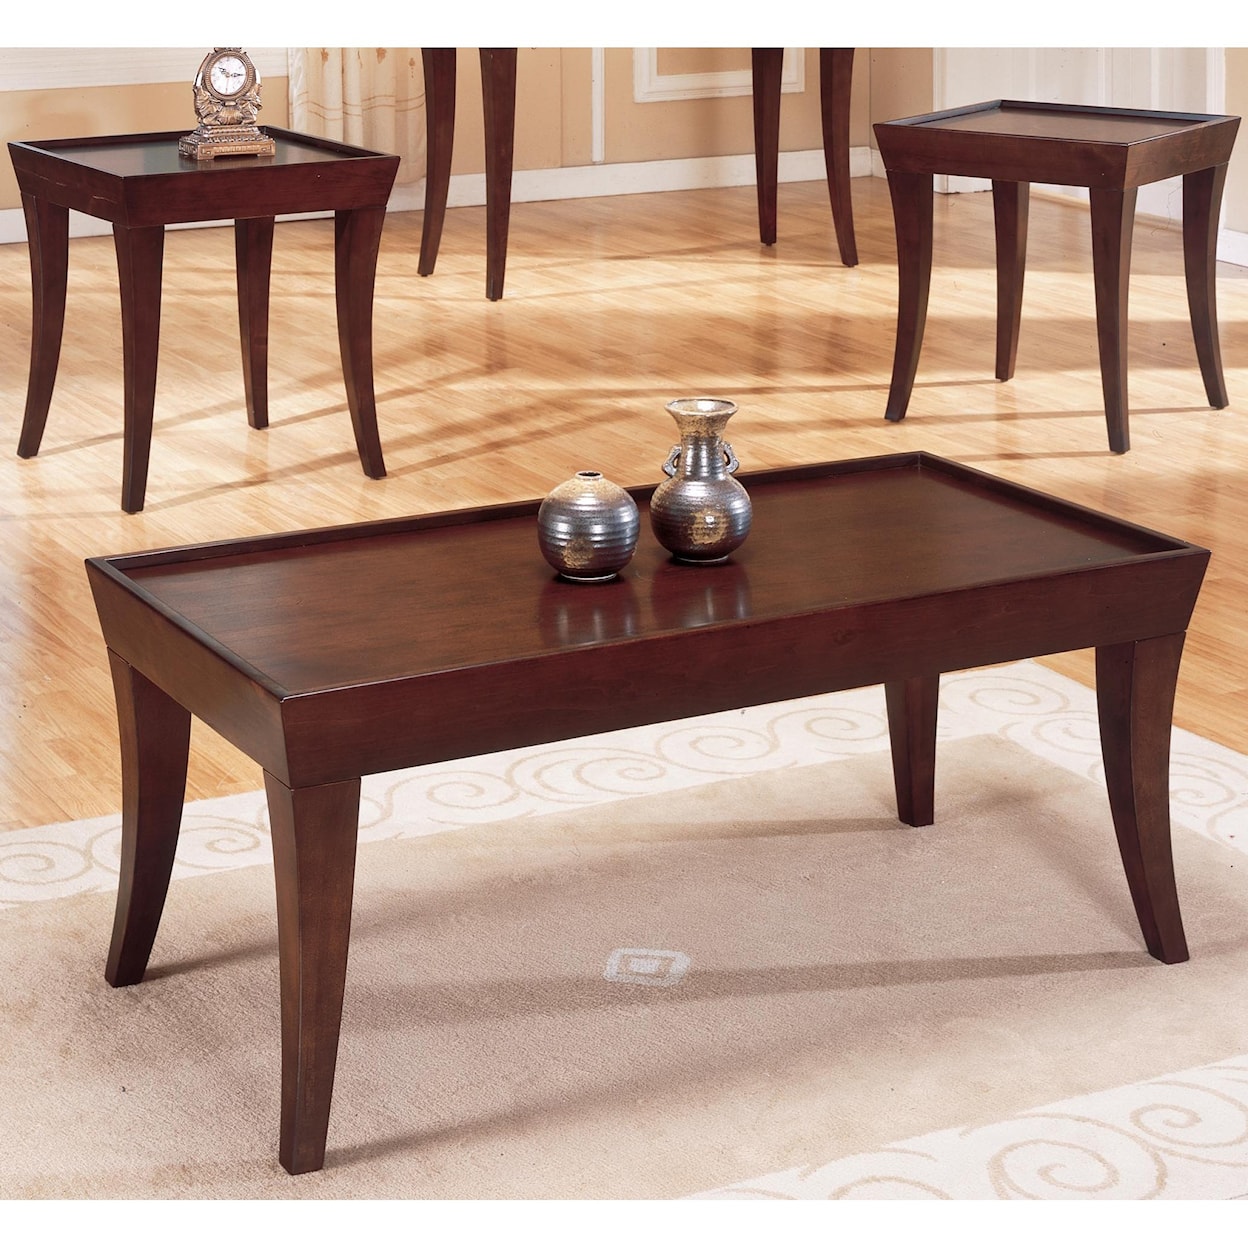 Homelegance Zen Casual Occasional Table Group